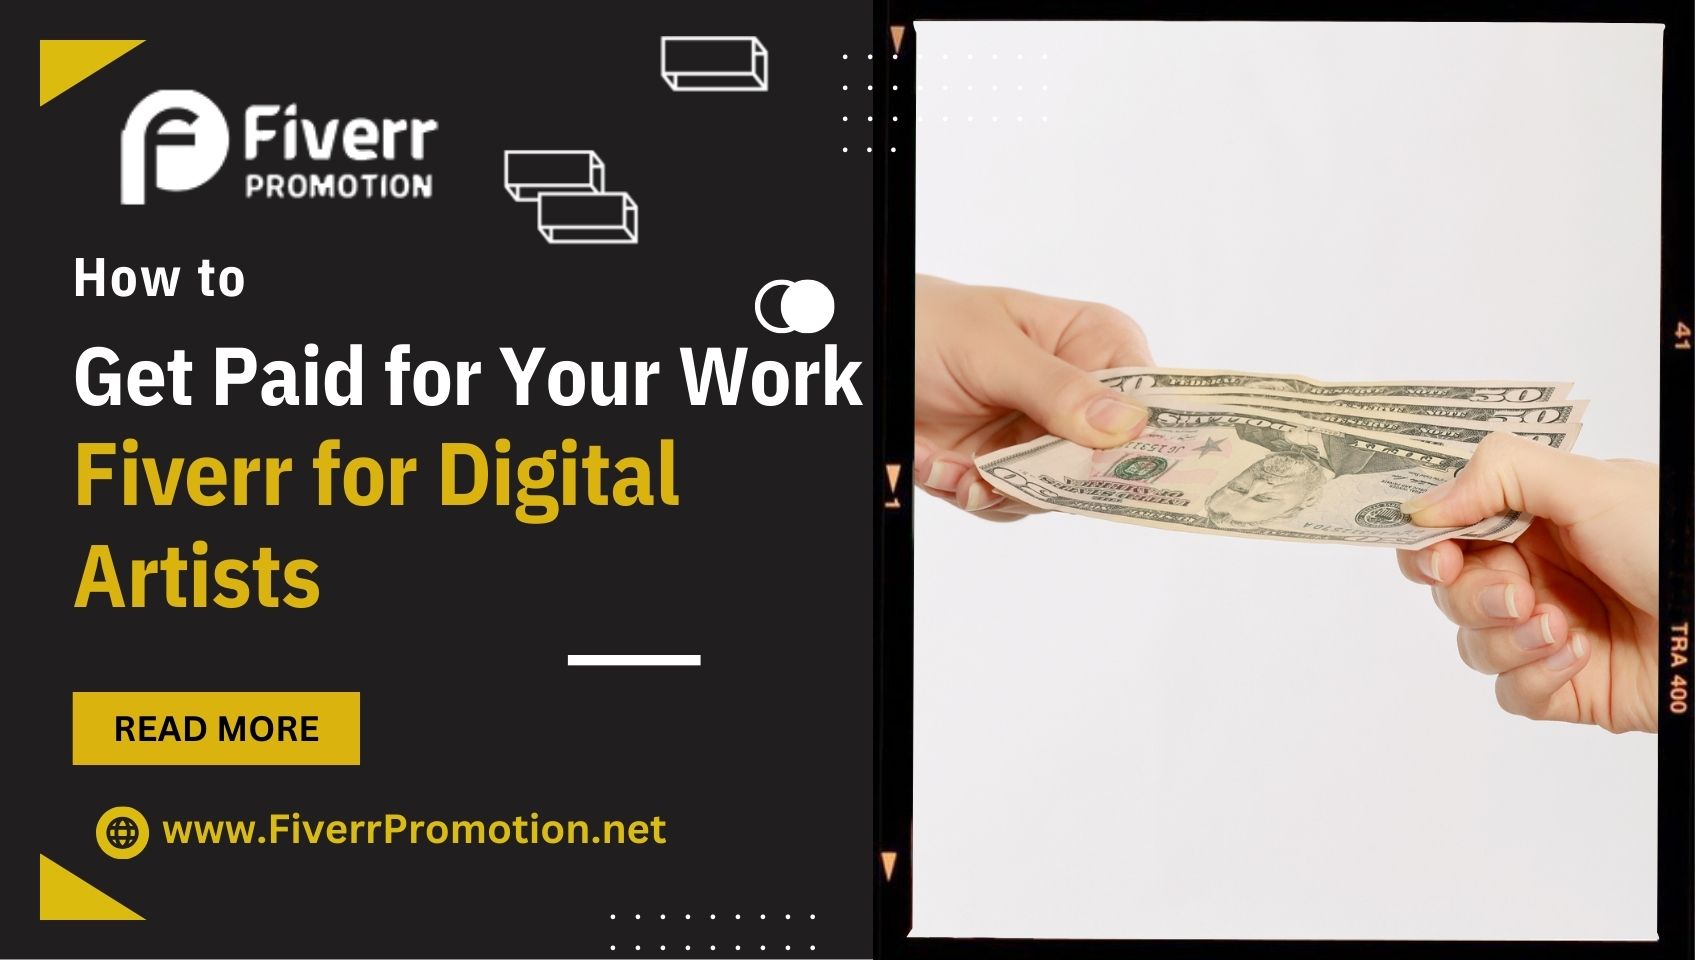 Fiverr for Digital Artists: How to Get Paid for Your Work